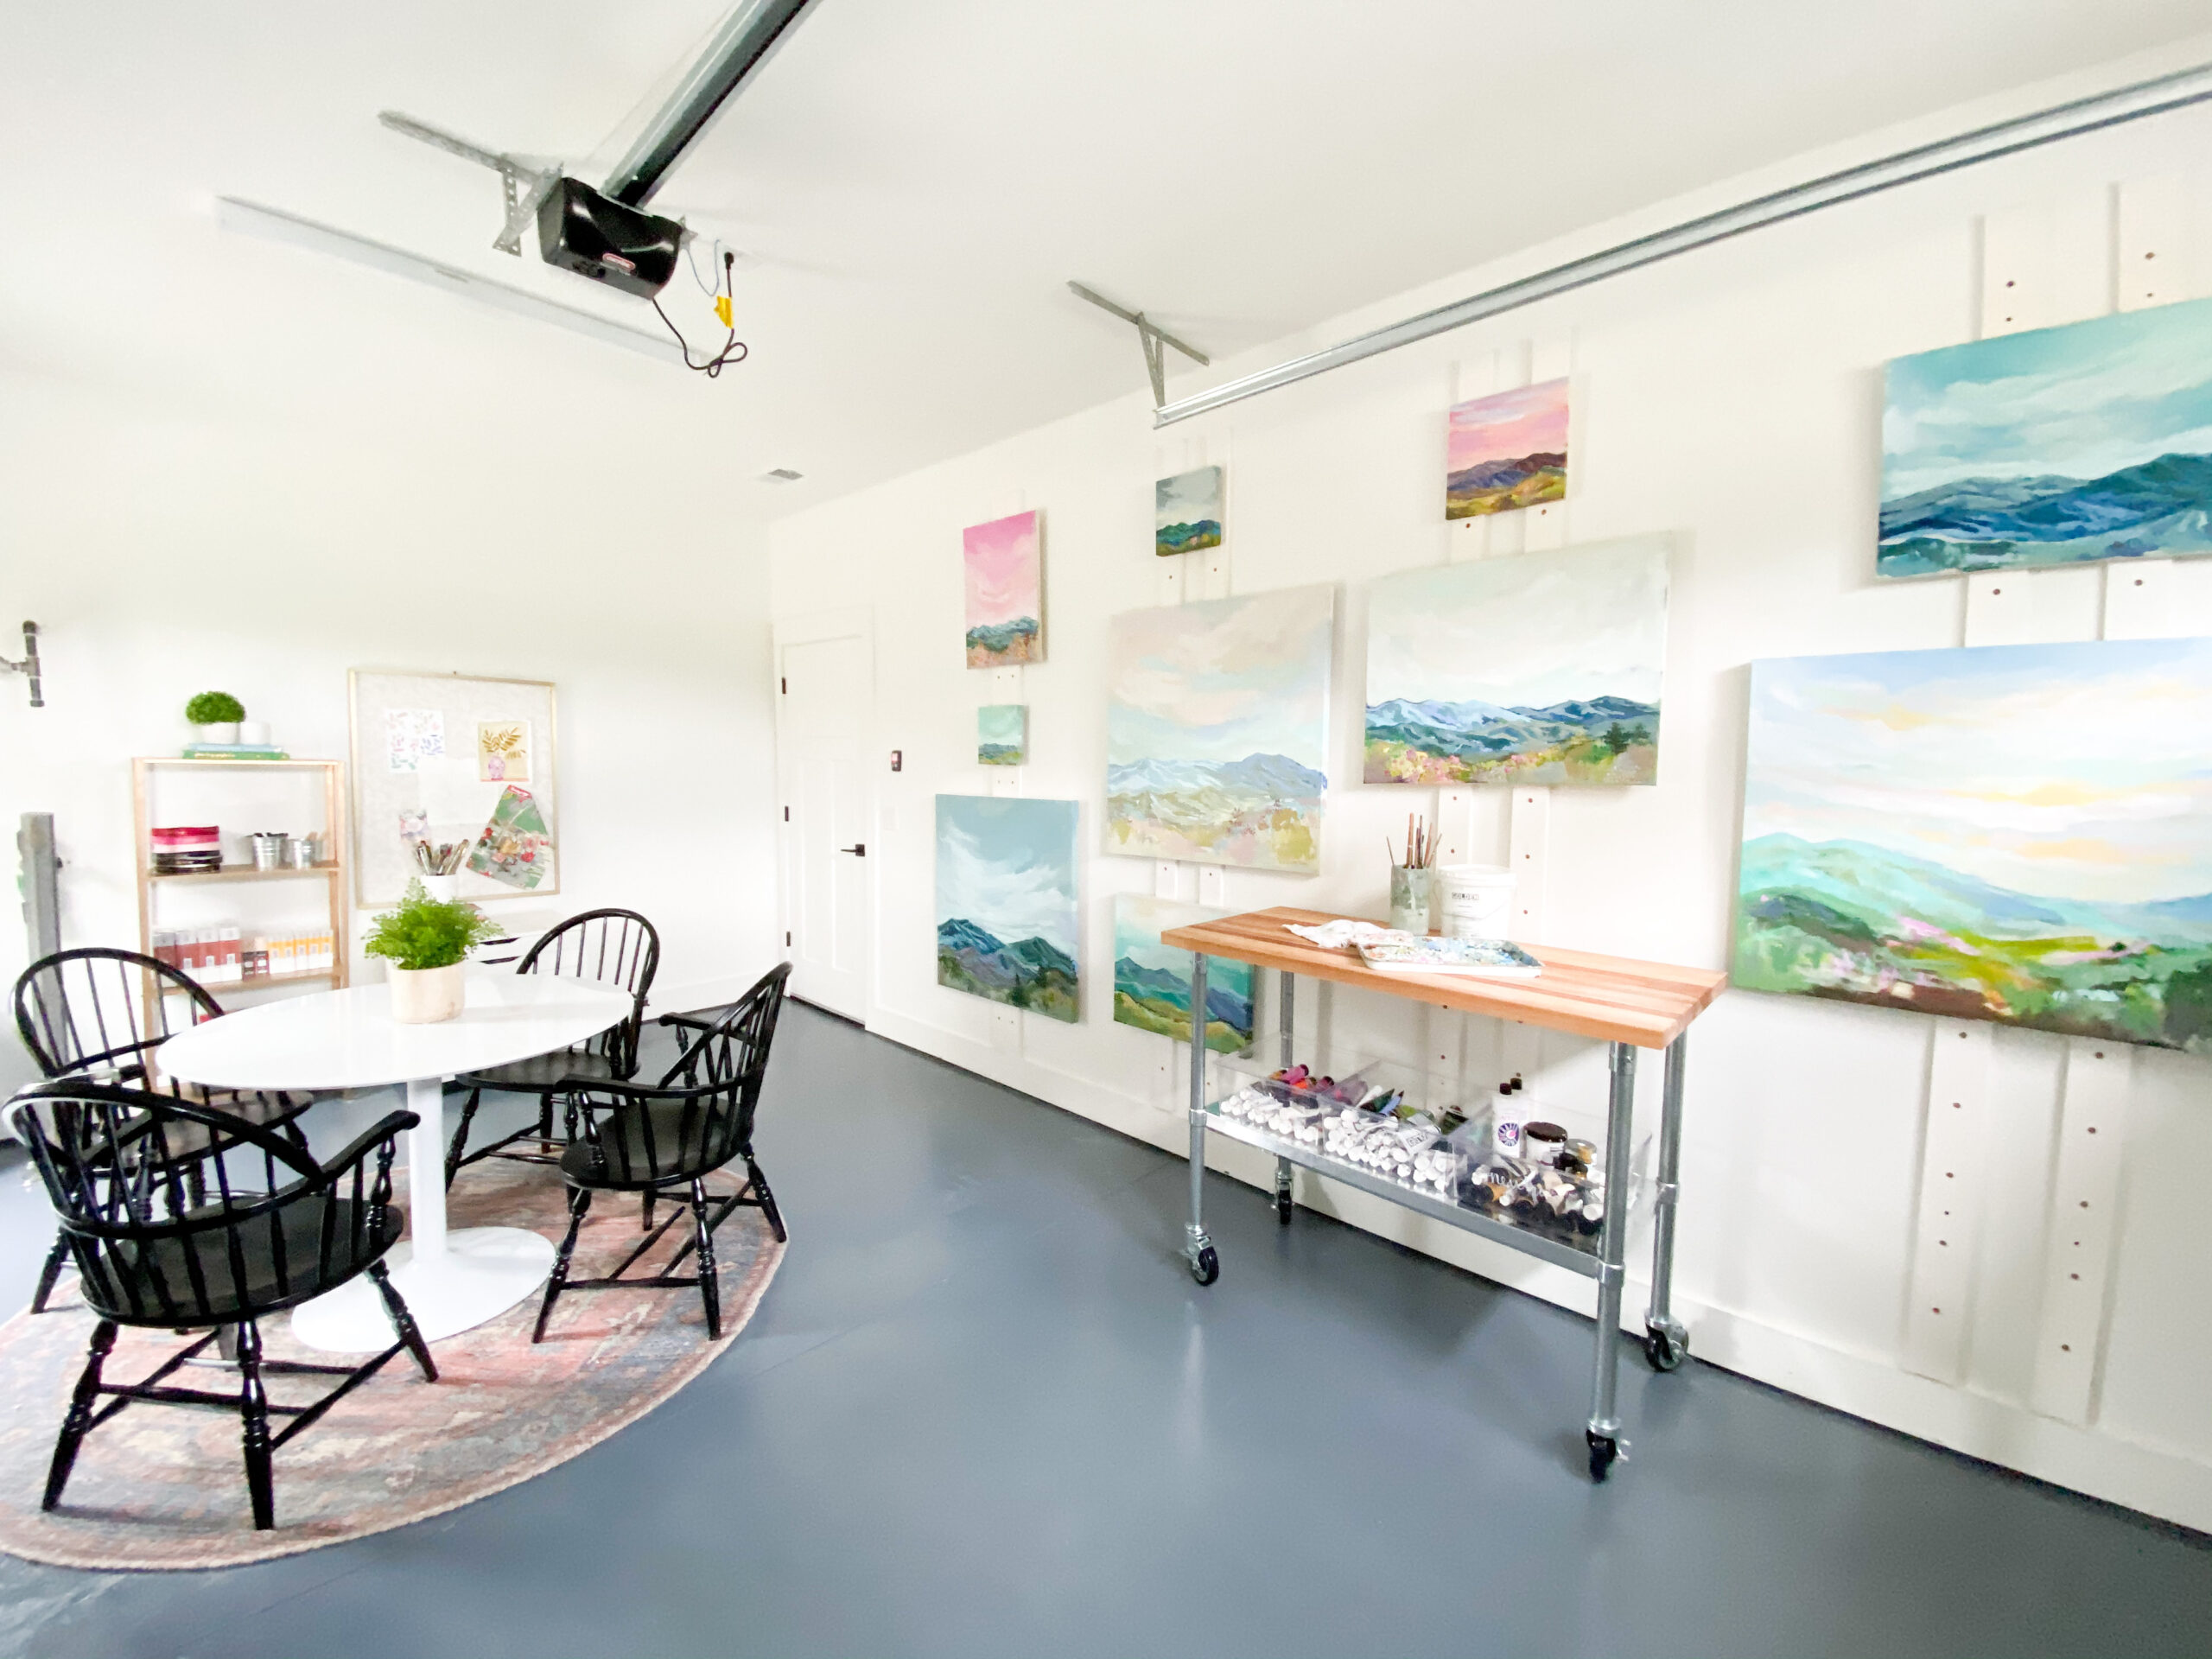 Open, white art studio with scenery paintings hung above work bench and table.